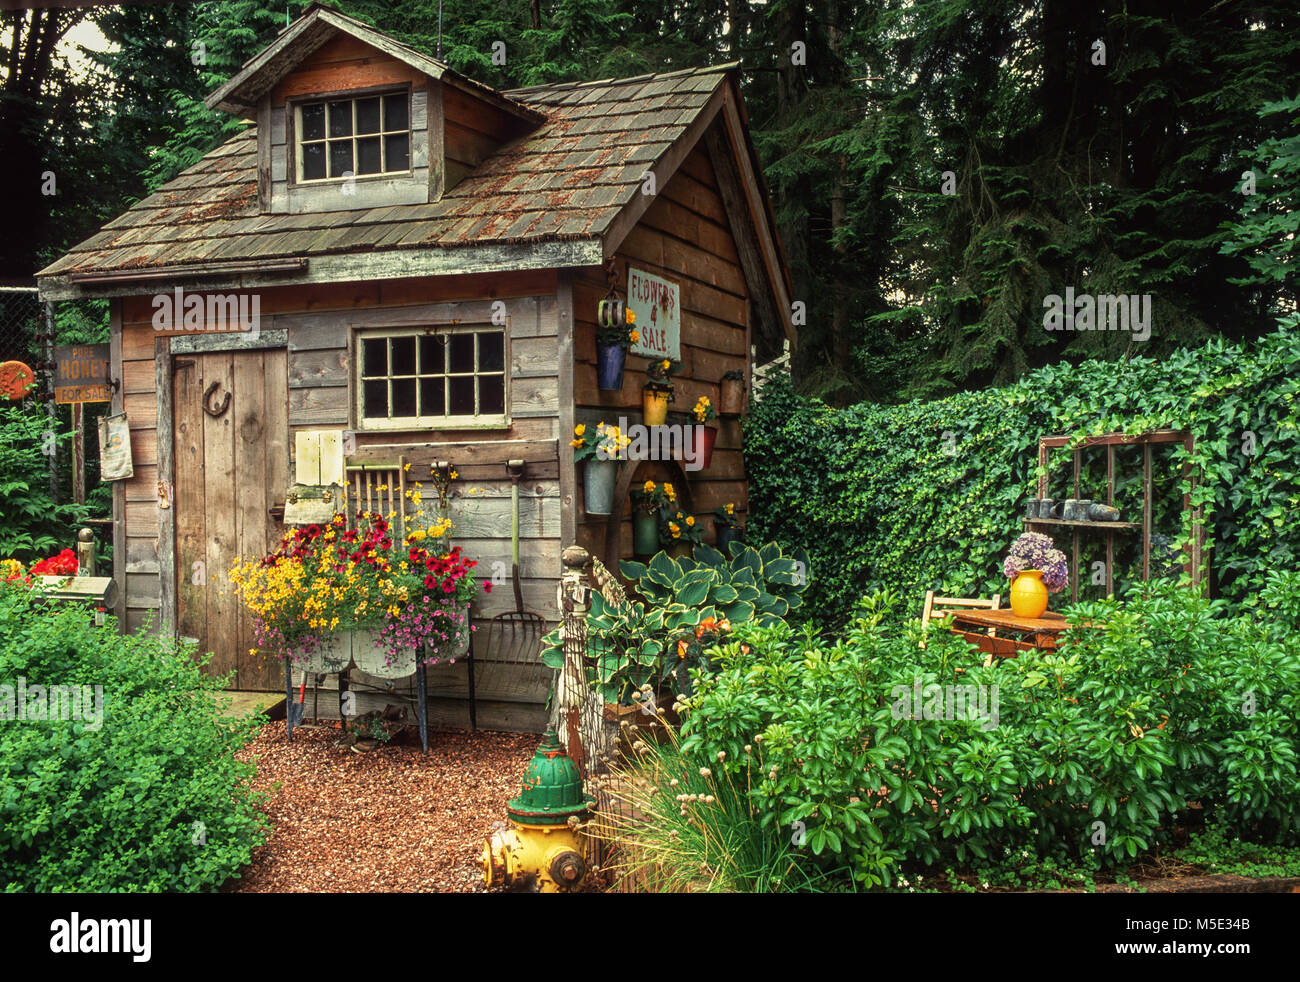 Rustic garden shed Stock Photo